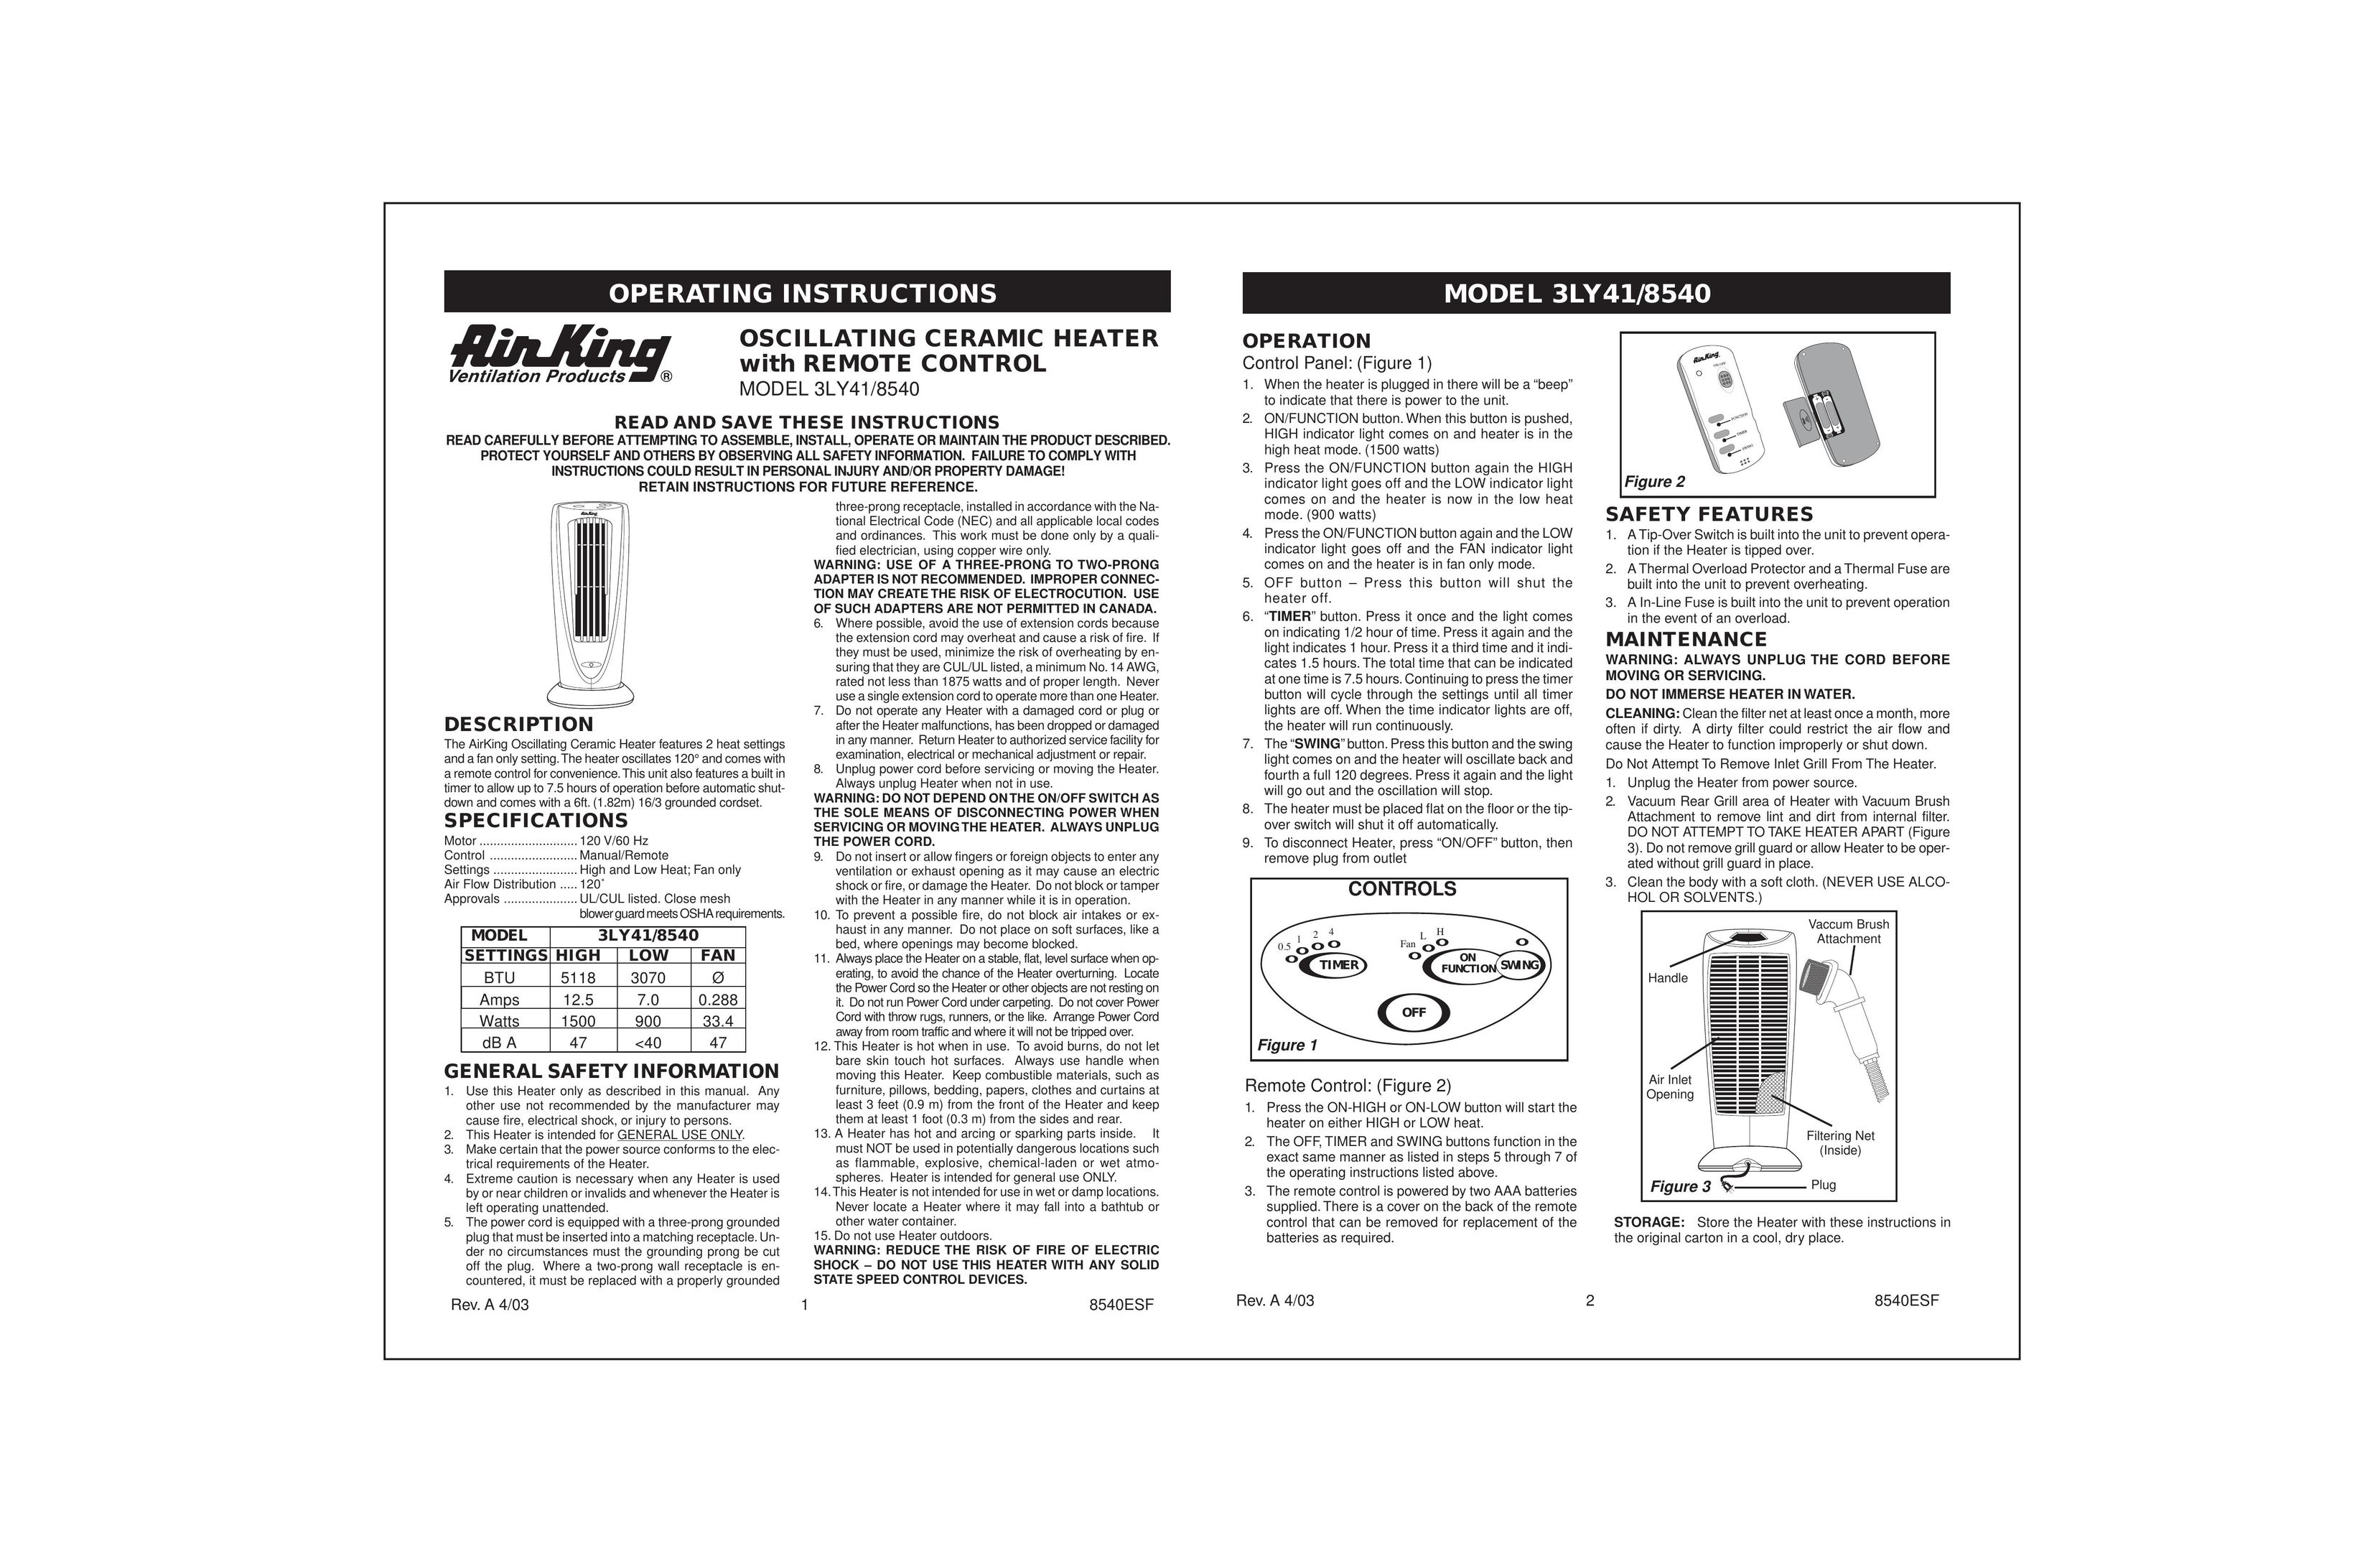 Air King 3LY41/8540 Electric Heater User Manual